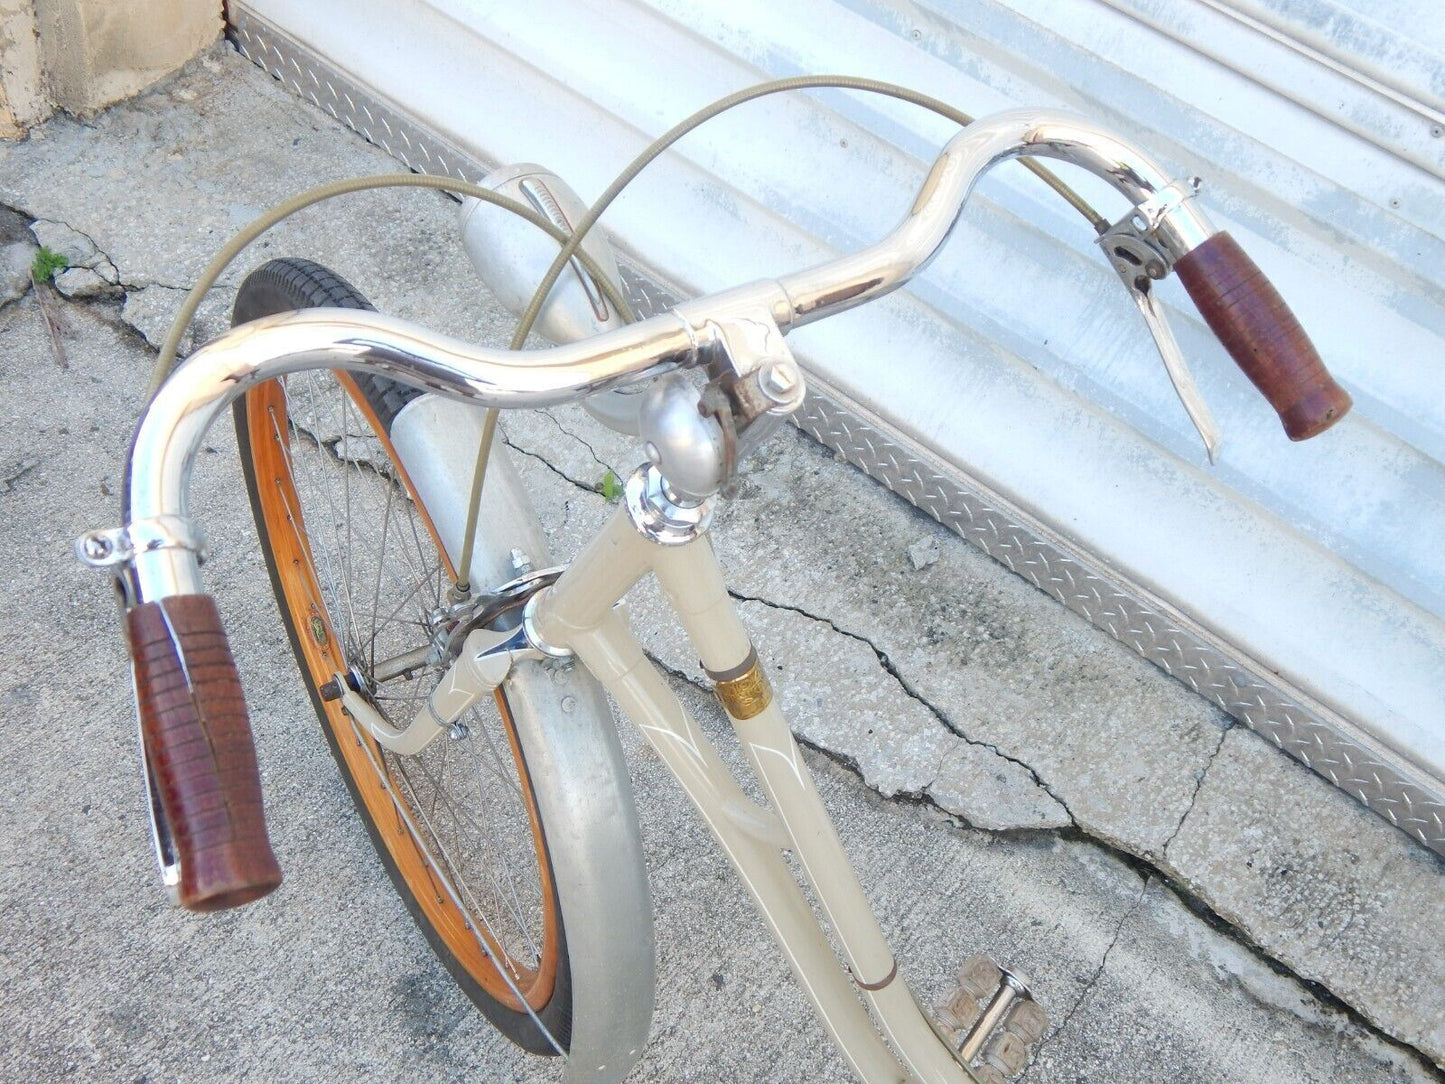 1940's VINTAGE LADY BICYCLE 26" WOODEN RIMS GRIPS FRANCE - MotoRaider